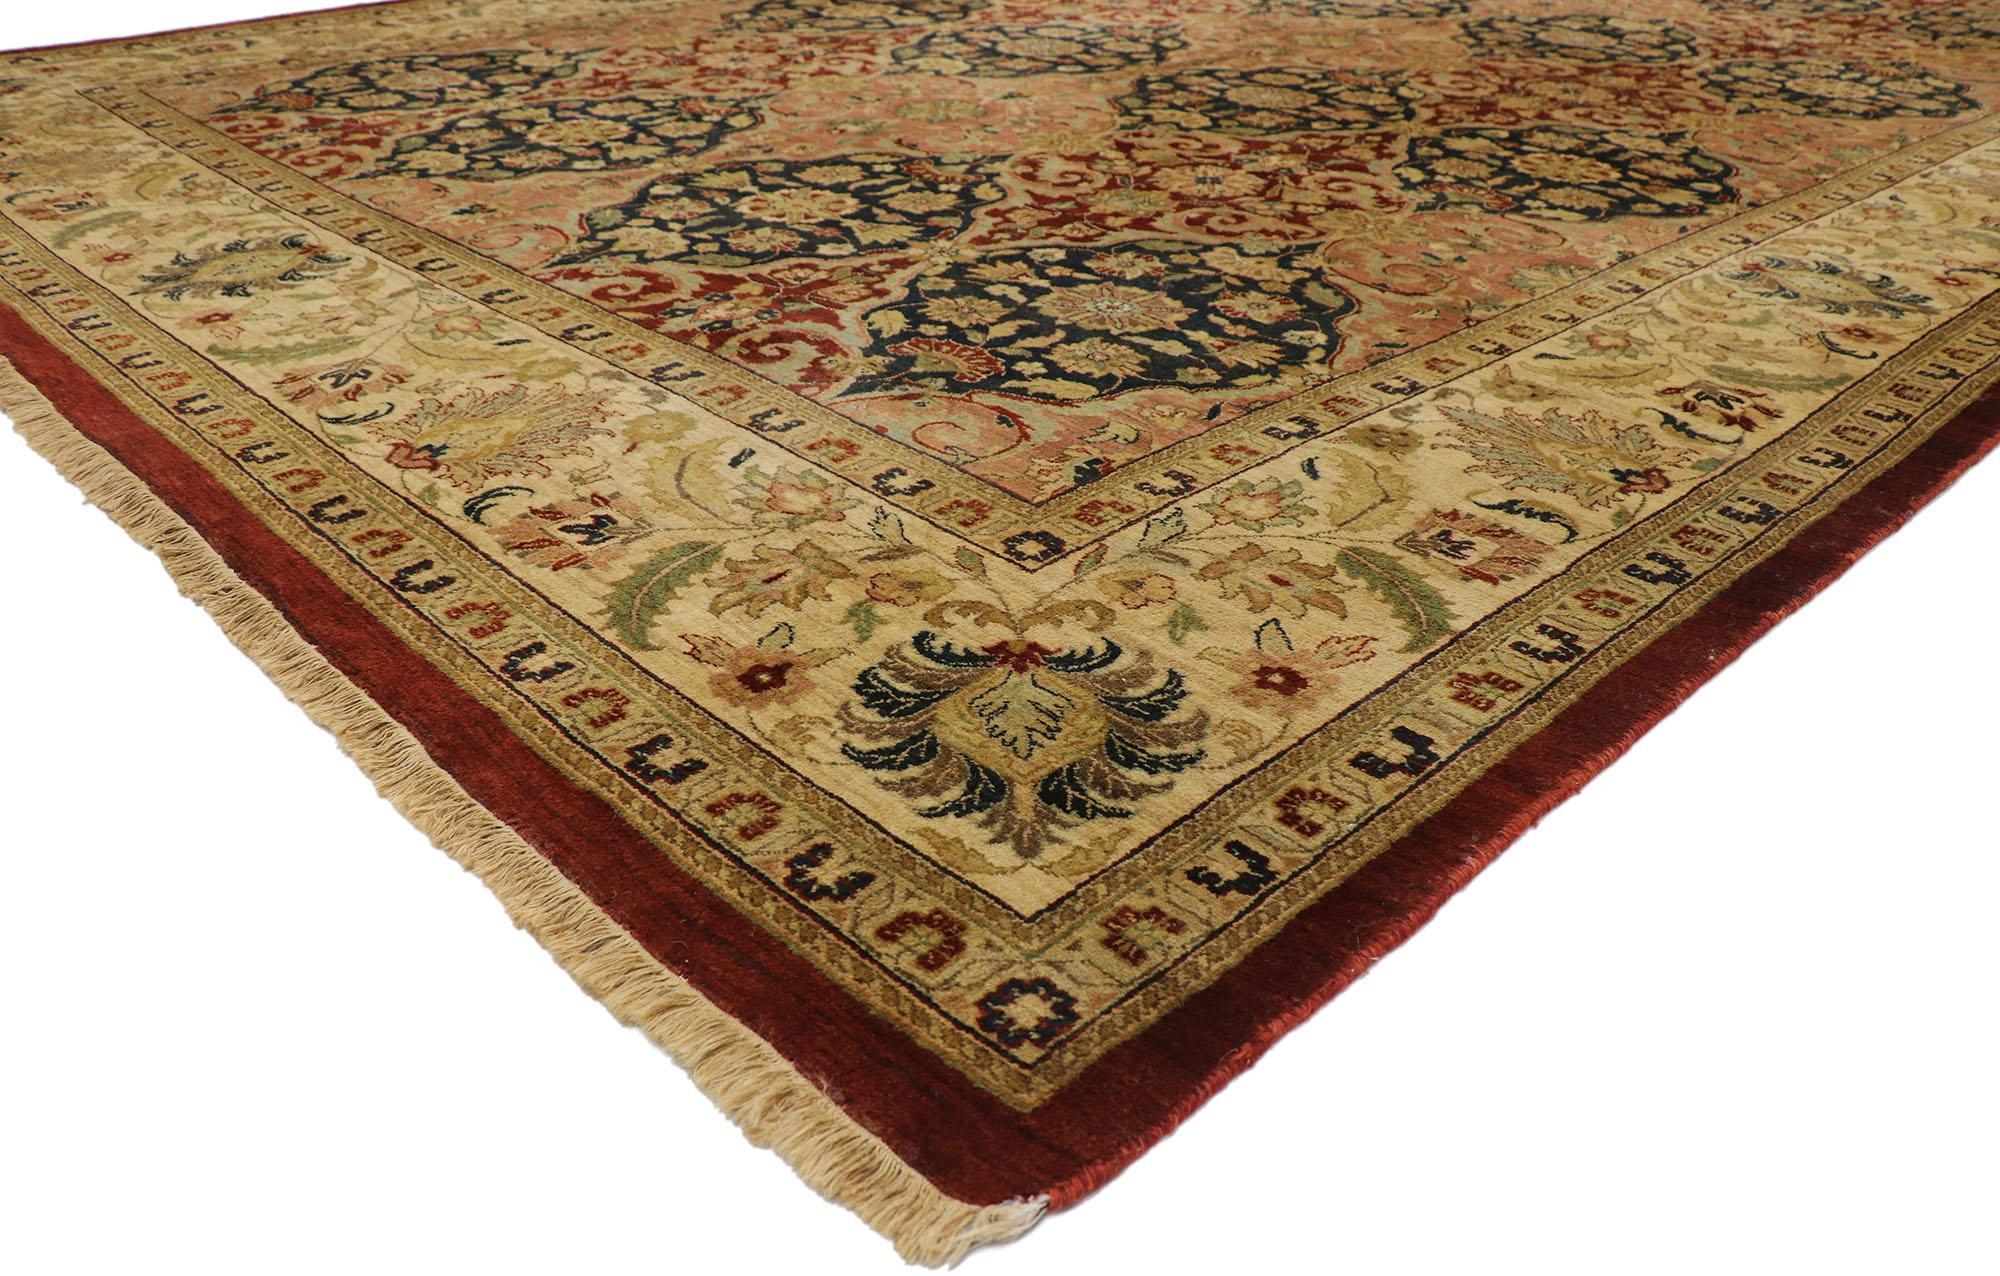 77612 Vintage Indian Palace rug with Old World Baroque style. Displaying a timeless design with well-balanced symmetry, this hand knotted wool vintage Indian palace rug astounds with its beauty. The abrashed field an all-over botanical compartment